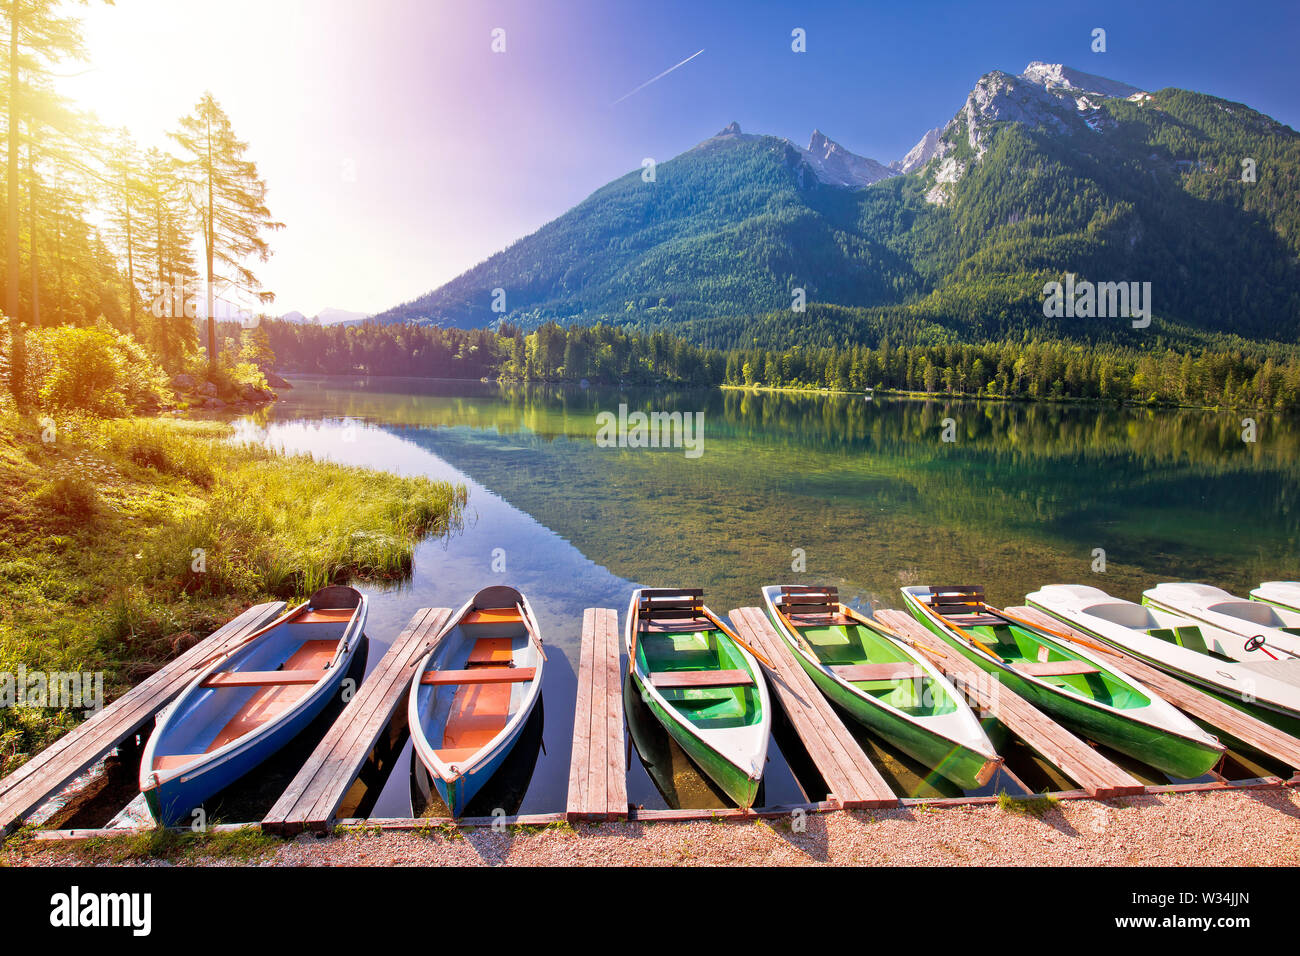 Colorful boats on Hintersee lake in Berchtesgaden Alpine landscape sunrise view, Bavaria region of Germany Stock Photo